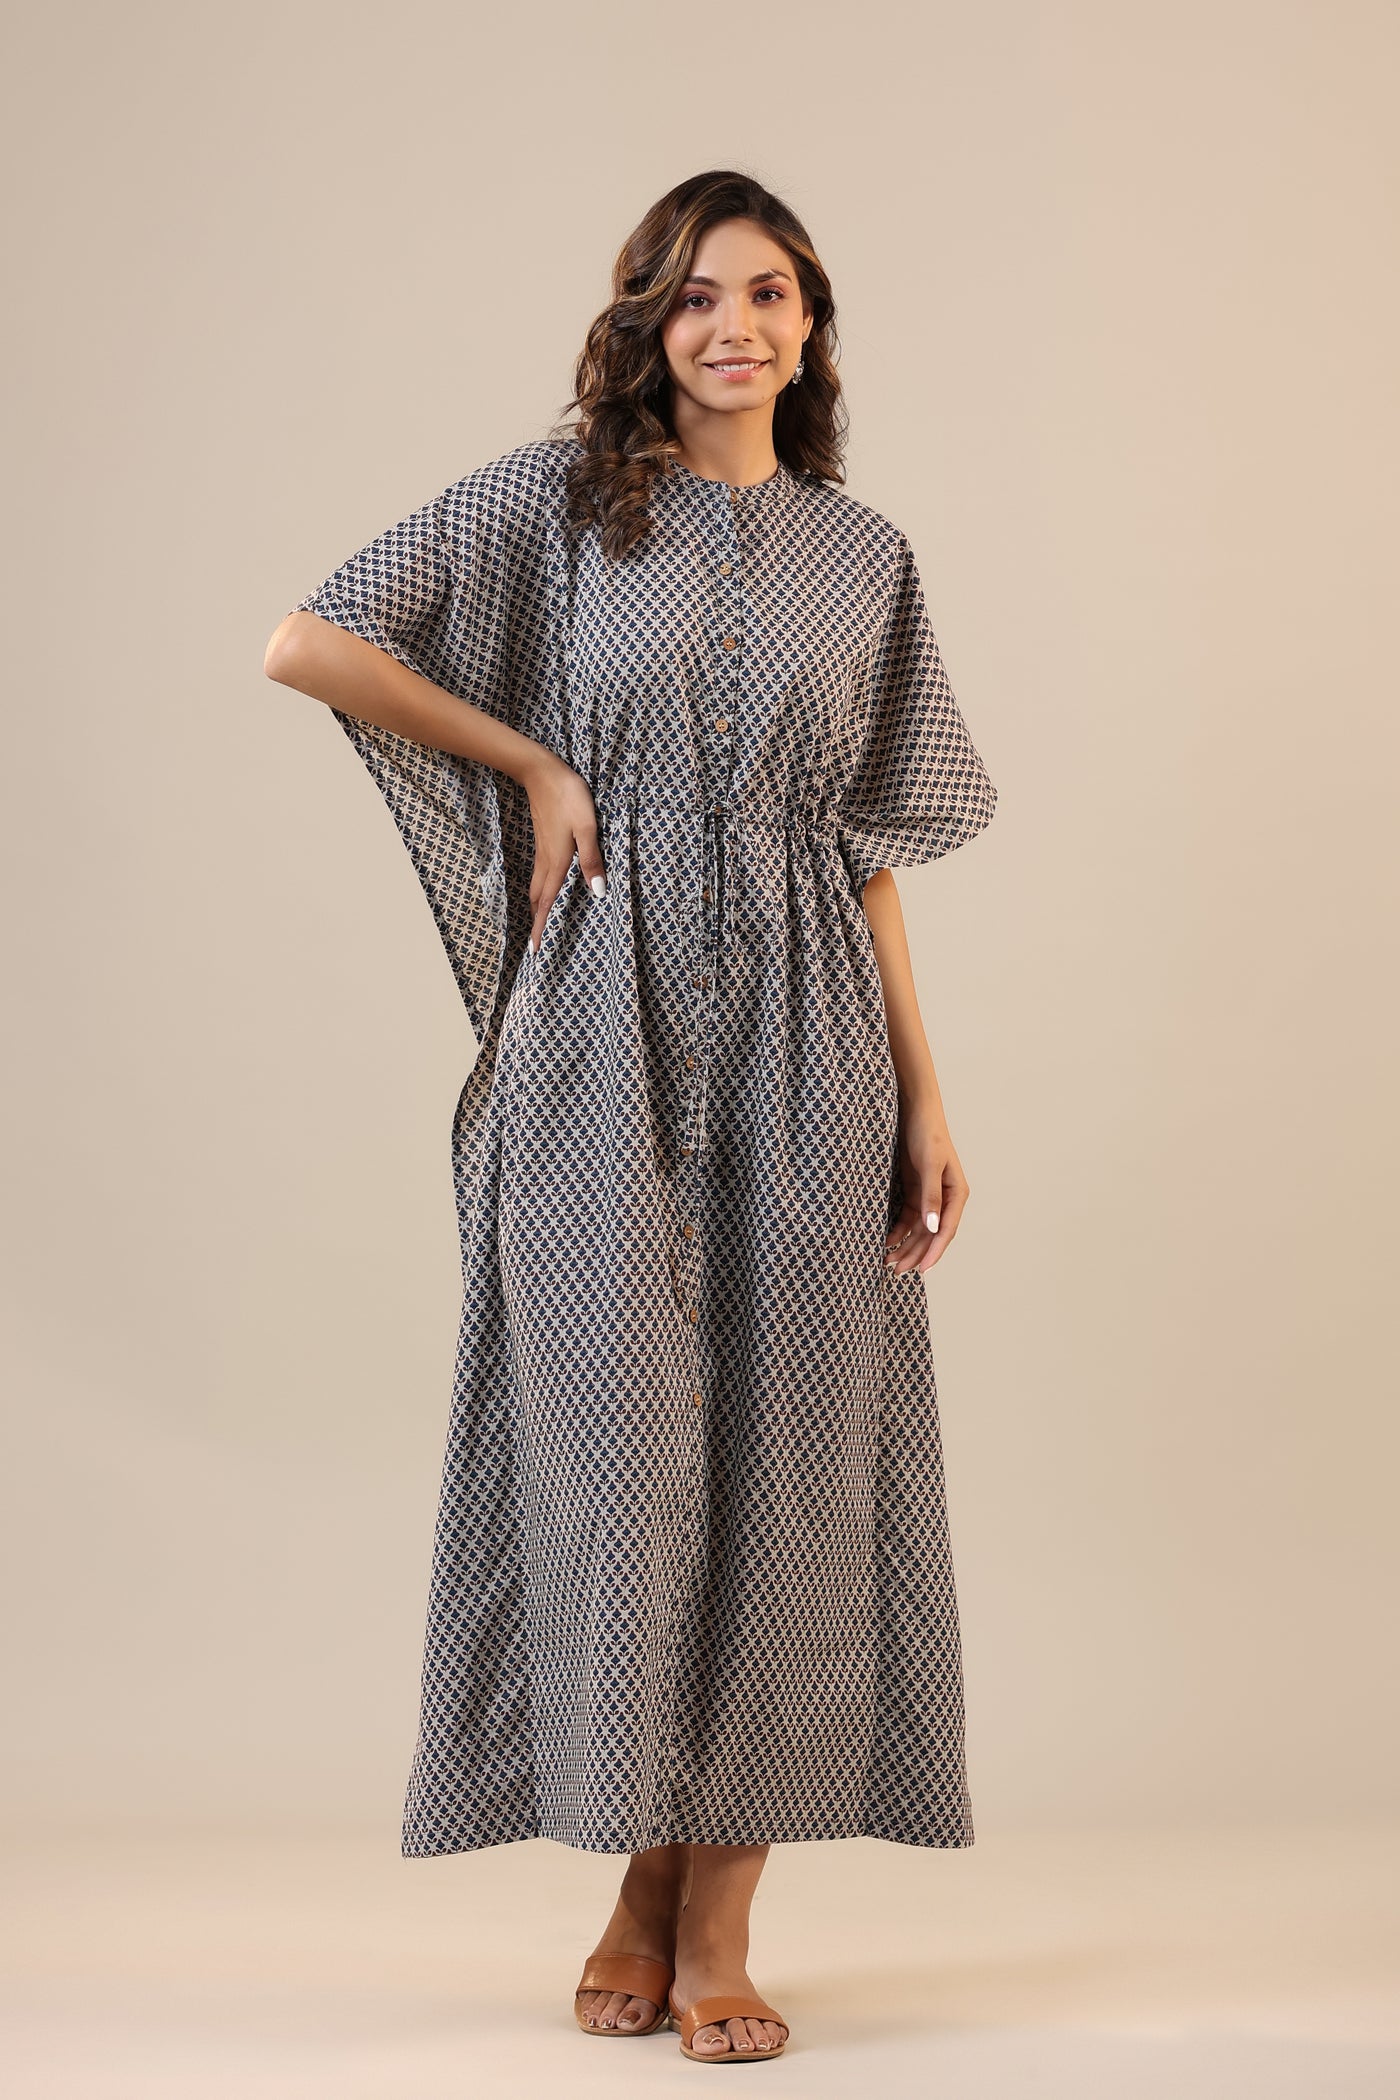 Booti on Grey Front Buttoned Kaftan